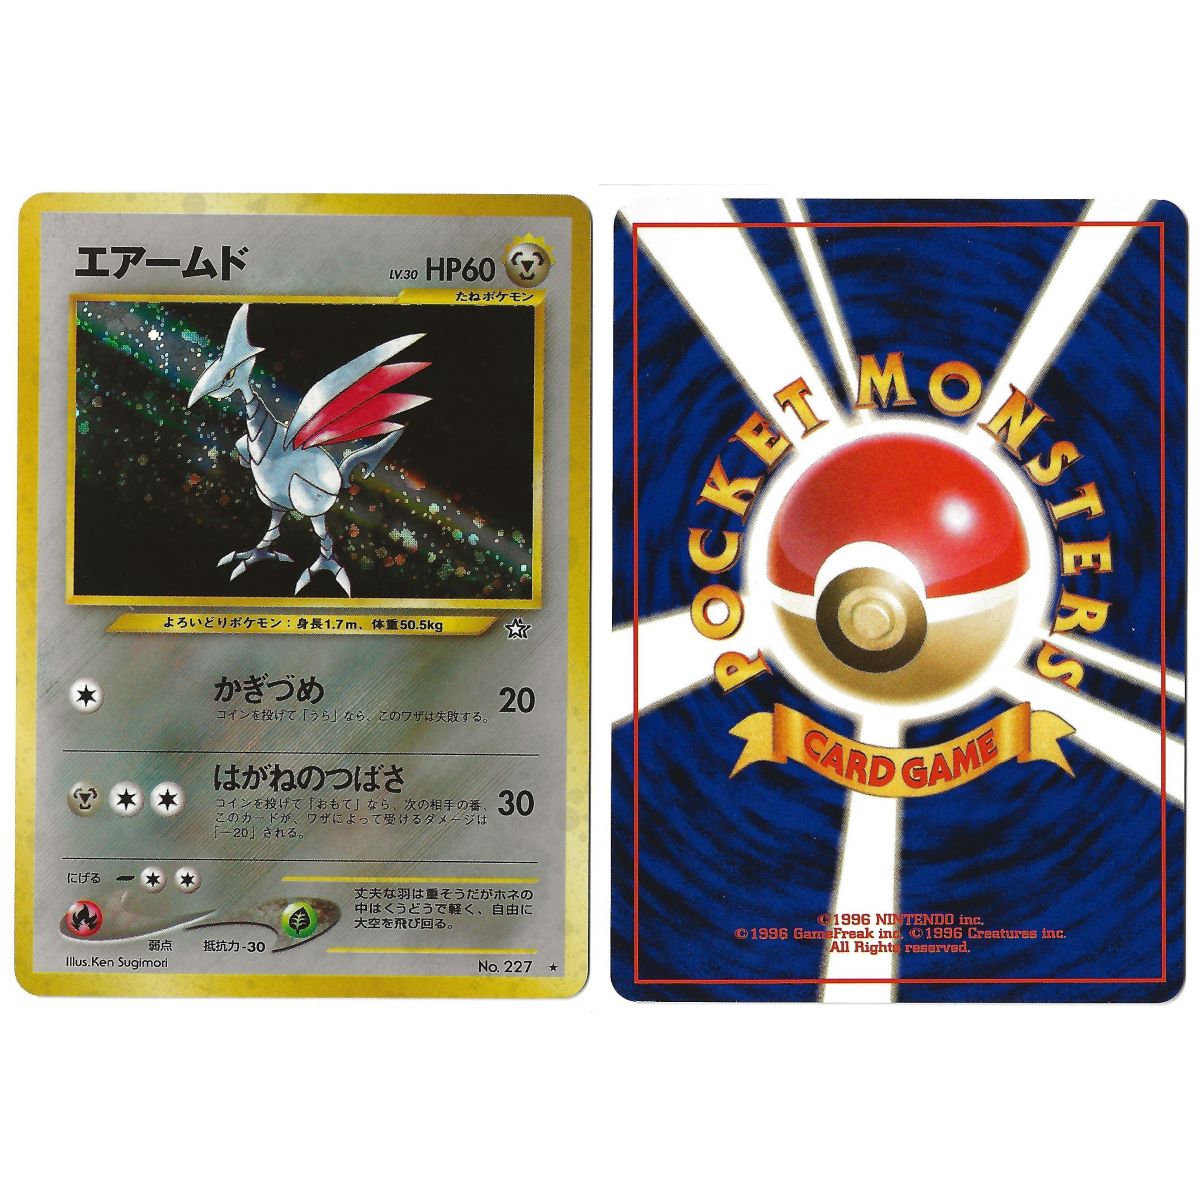 Skarmory (2) No.227 Gold, Silver, to a New World... N1 Holo Unlimited Japonais Voir Scan